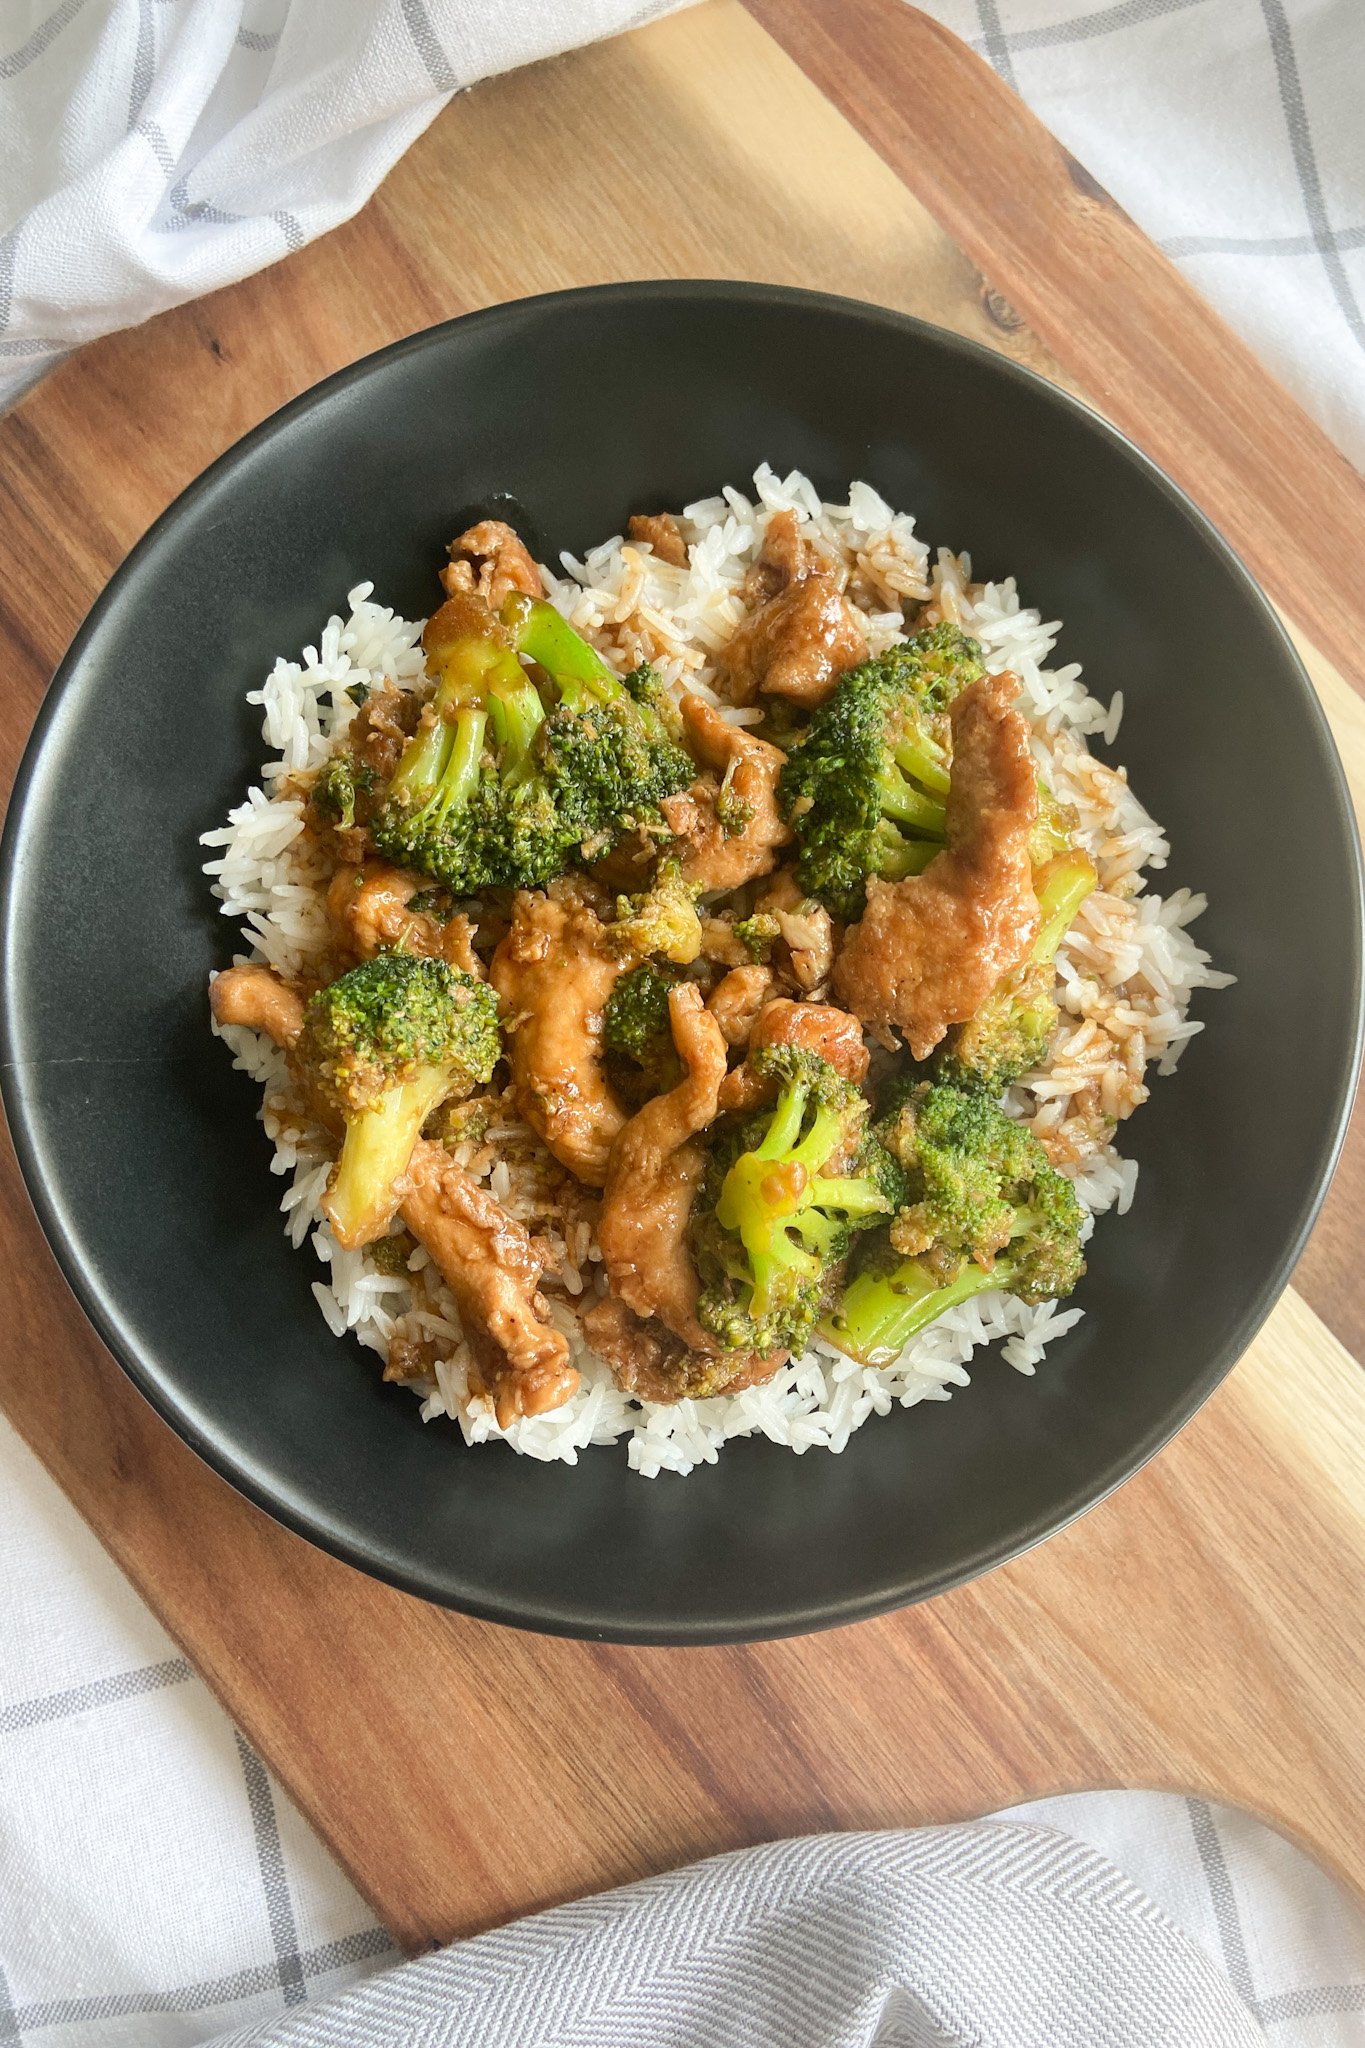 Chicken and broccoli stir-fry served in a black bowl